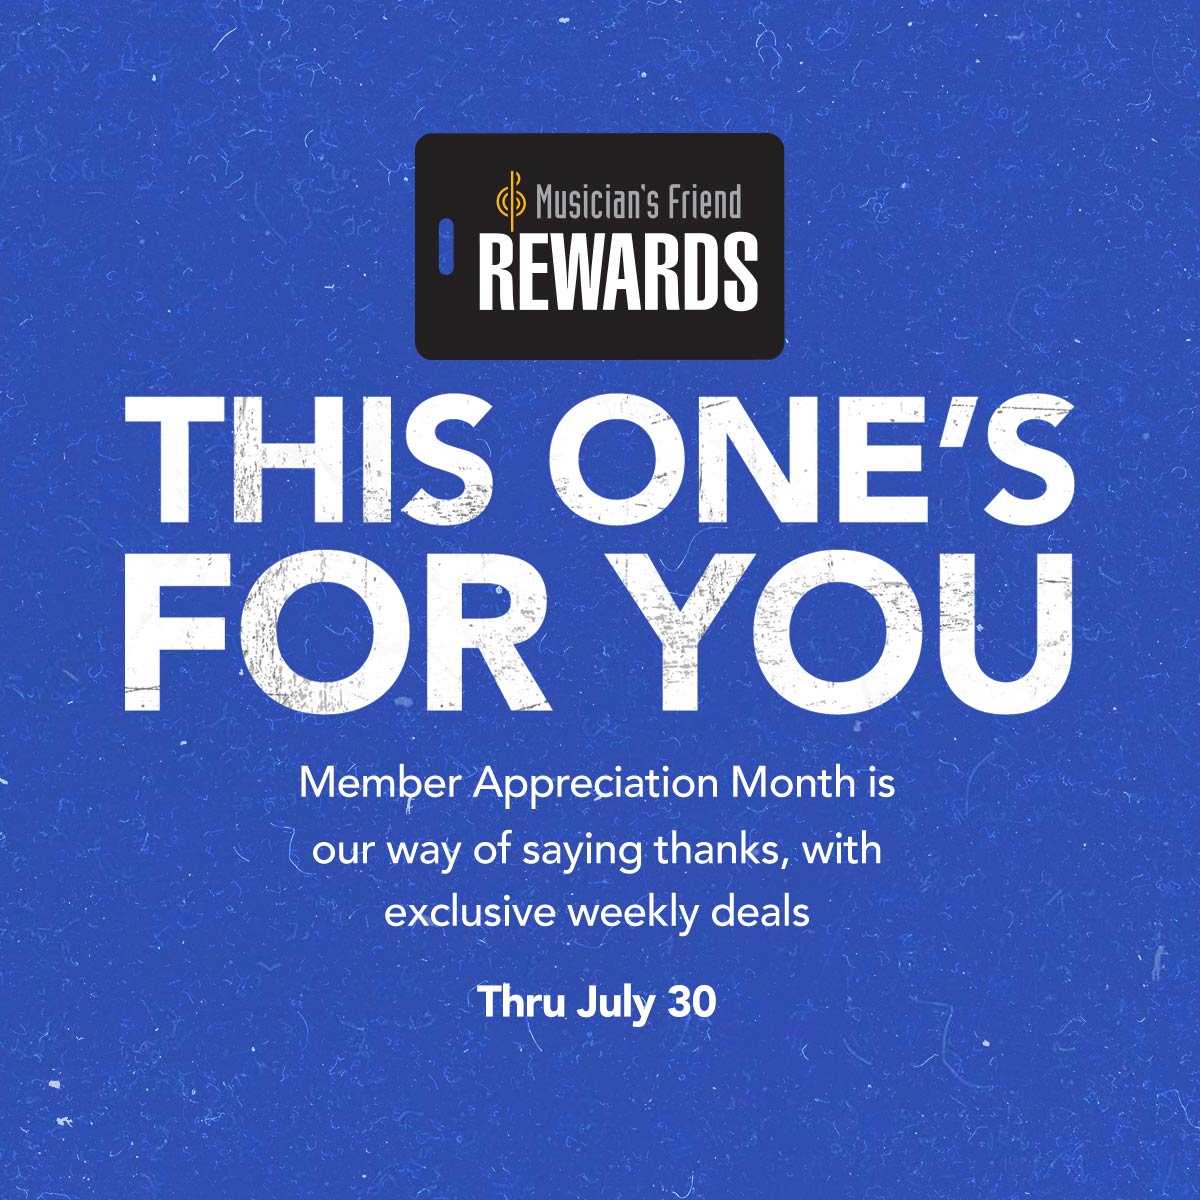 Musician's Friend Rewards. This one's for you. Member Appreciation Month is our way of saying thanks, with exclusively weekly deals. Thru July 30.